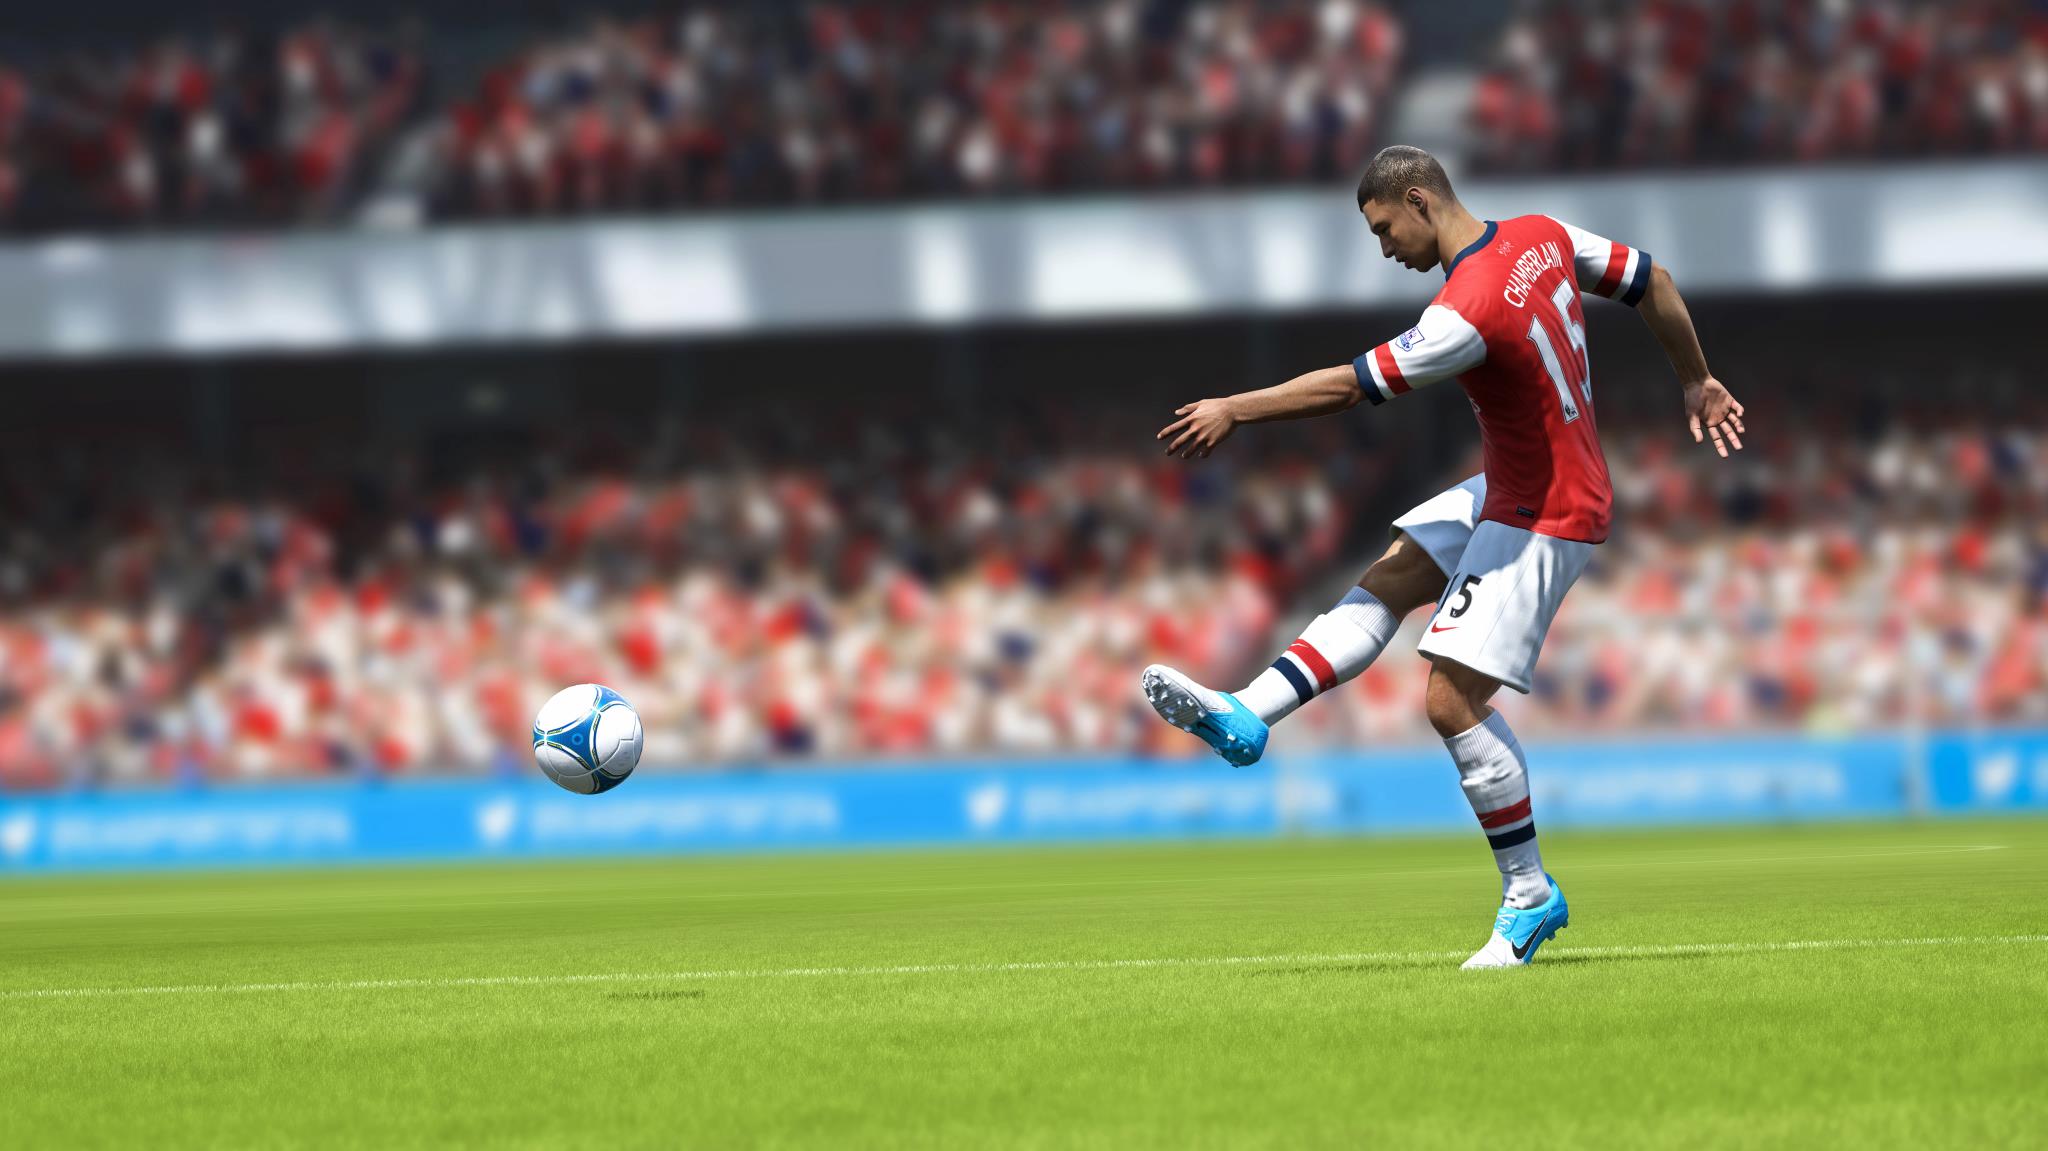 FIFA 13 | Arsenal's Oxlade Chamberlain is on the ball